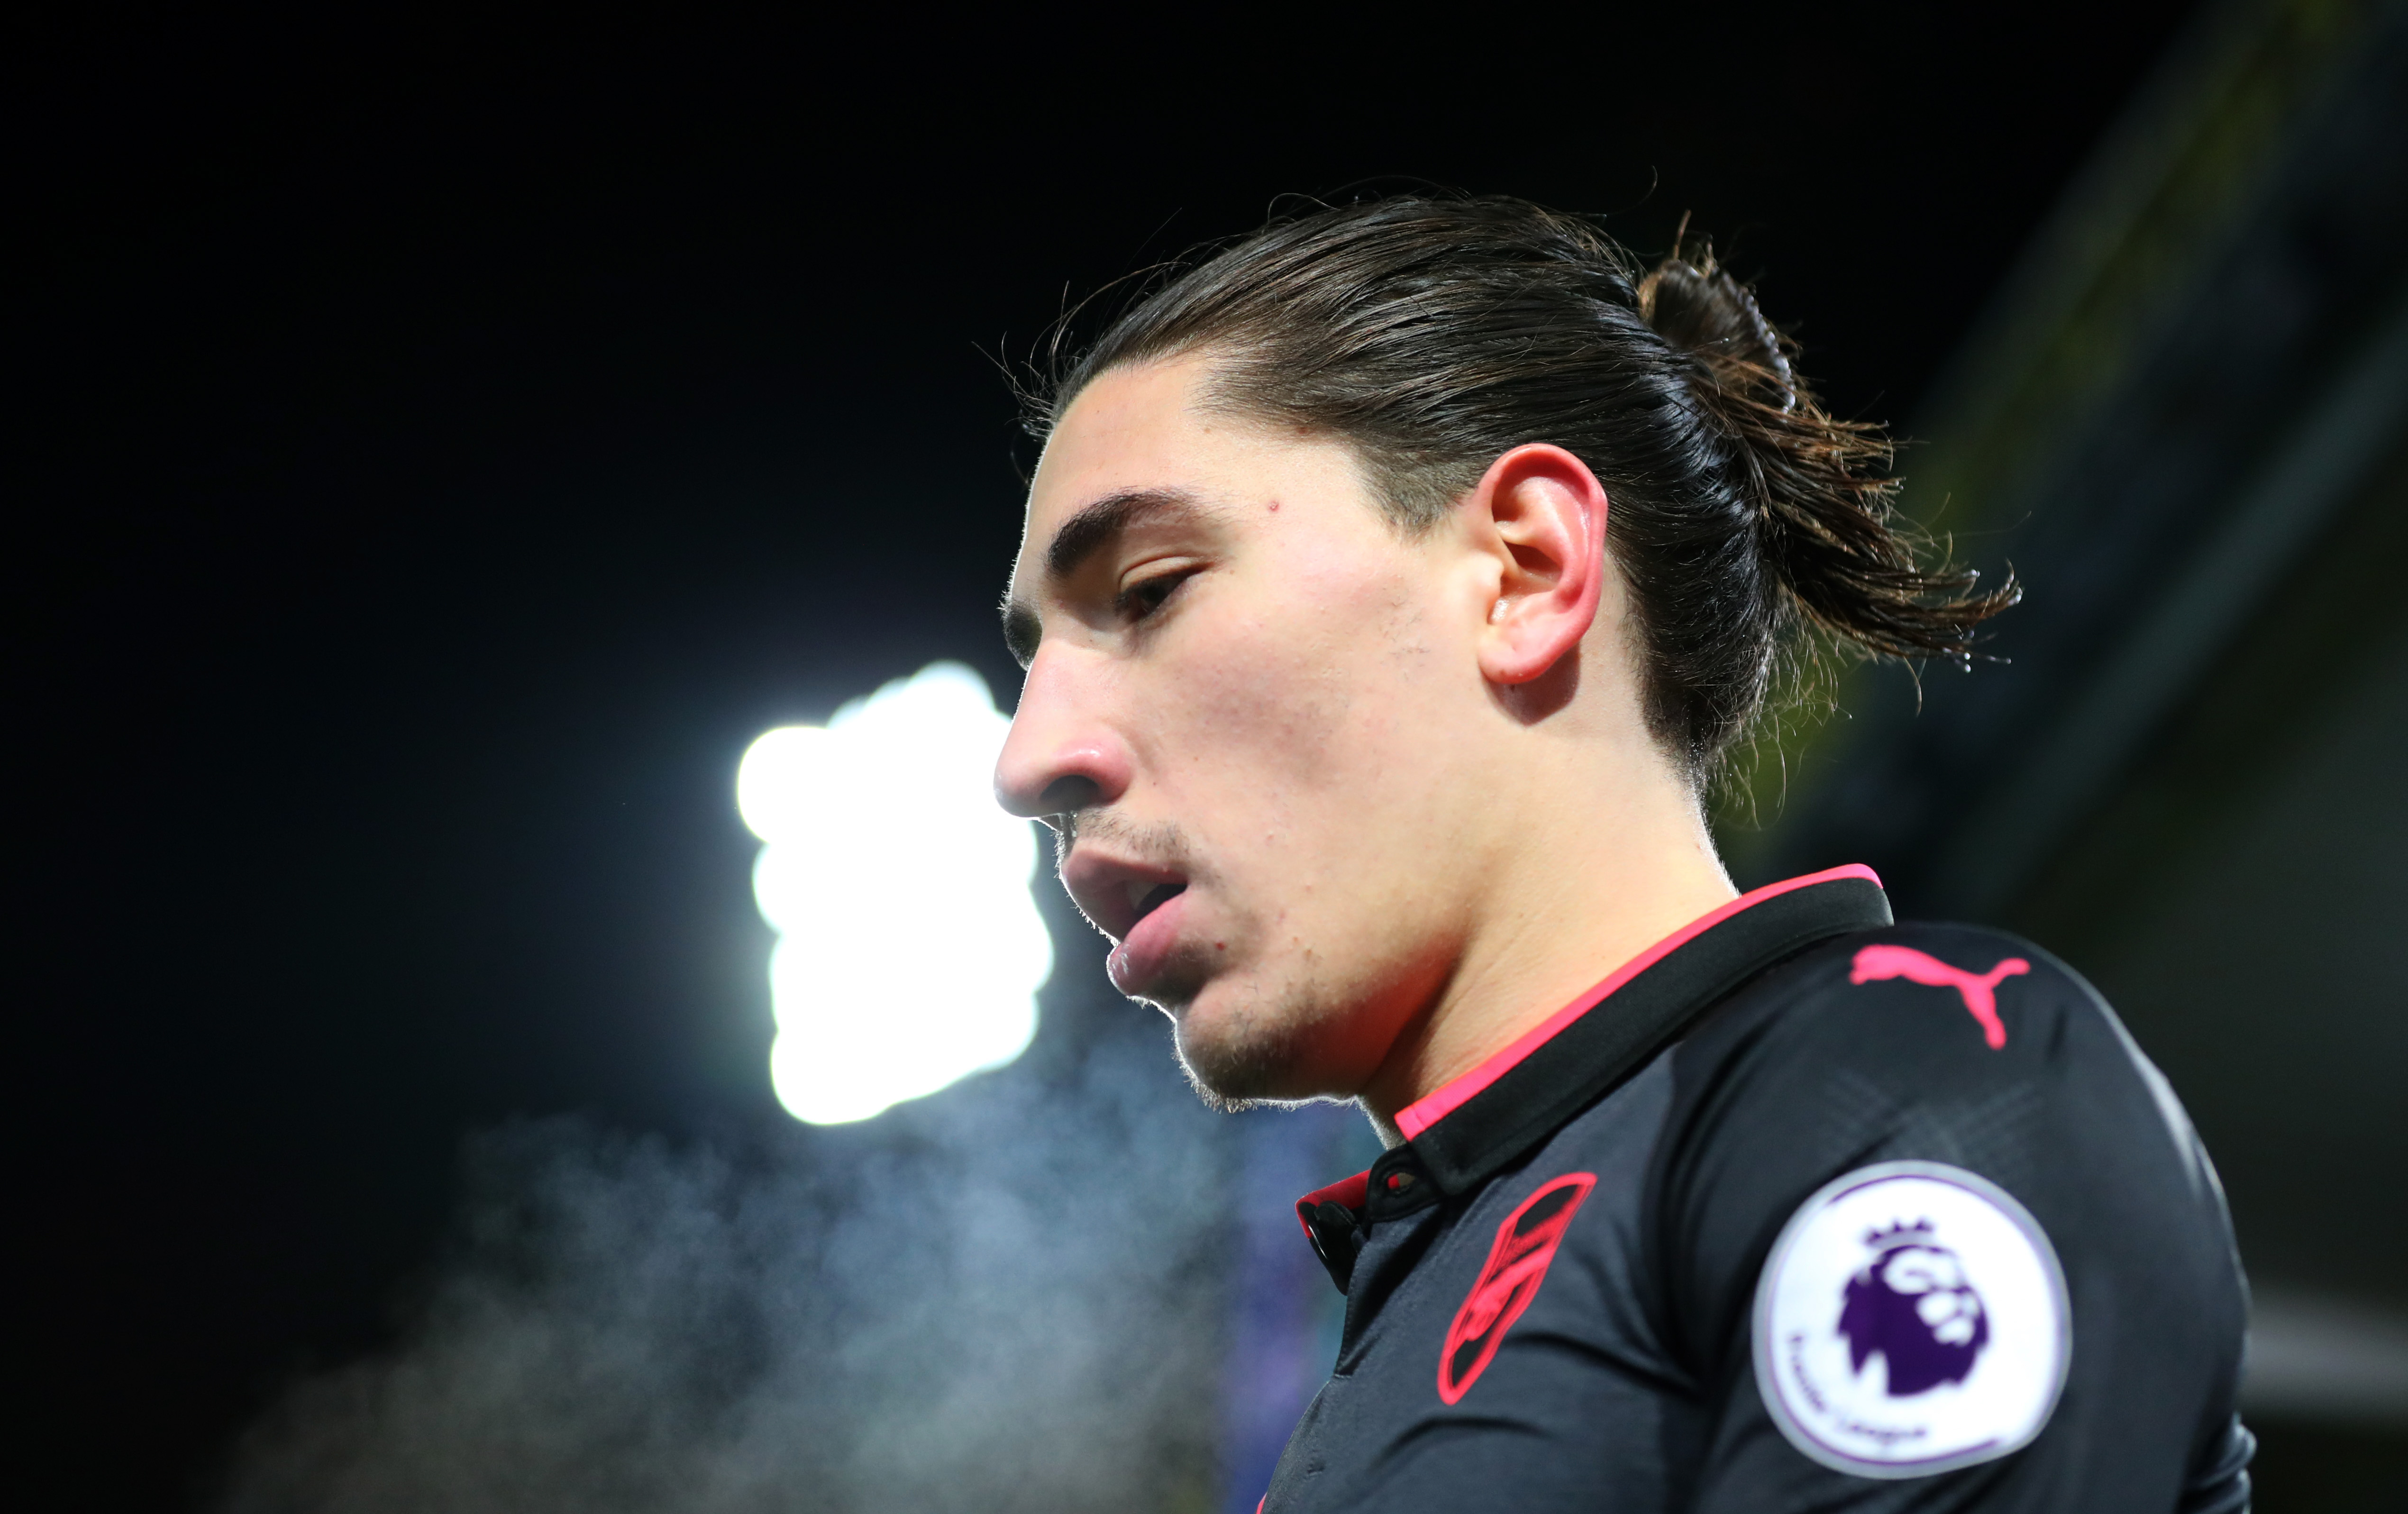 LONDON, ENGLAND - DECEMBER 28: Hector Bellerin of Arsenal during the Premier League match between Crystal Palace and Arsenal at Selhurst Park on December 28, 2017 in London, England. (Photo by Catherine Ivill/Getty Images)